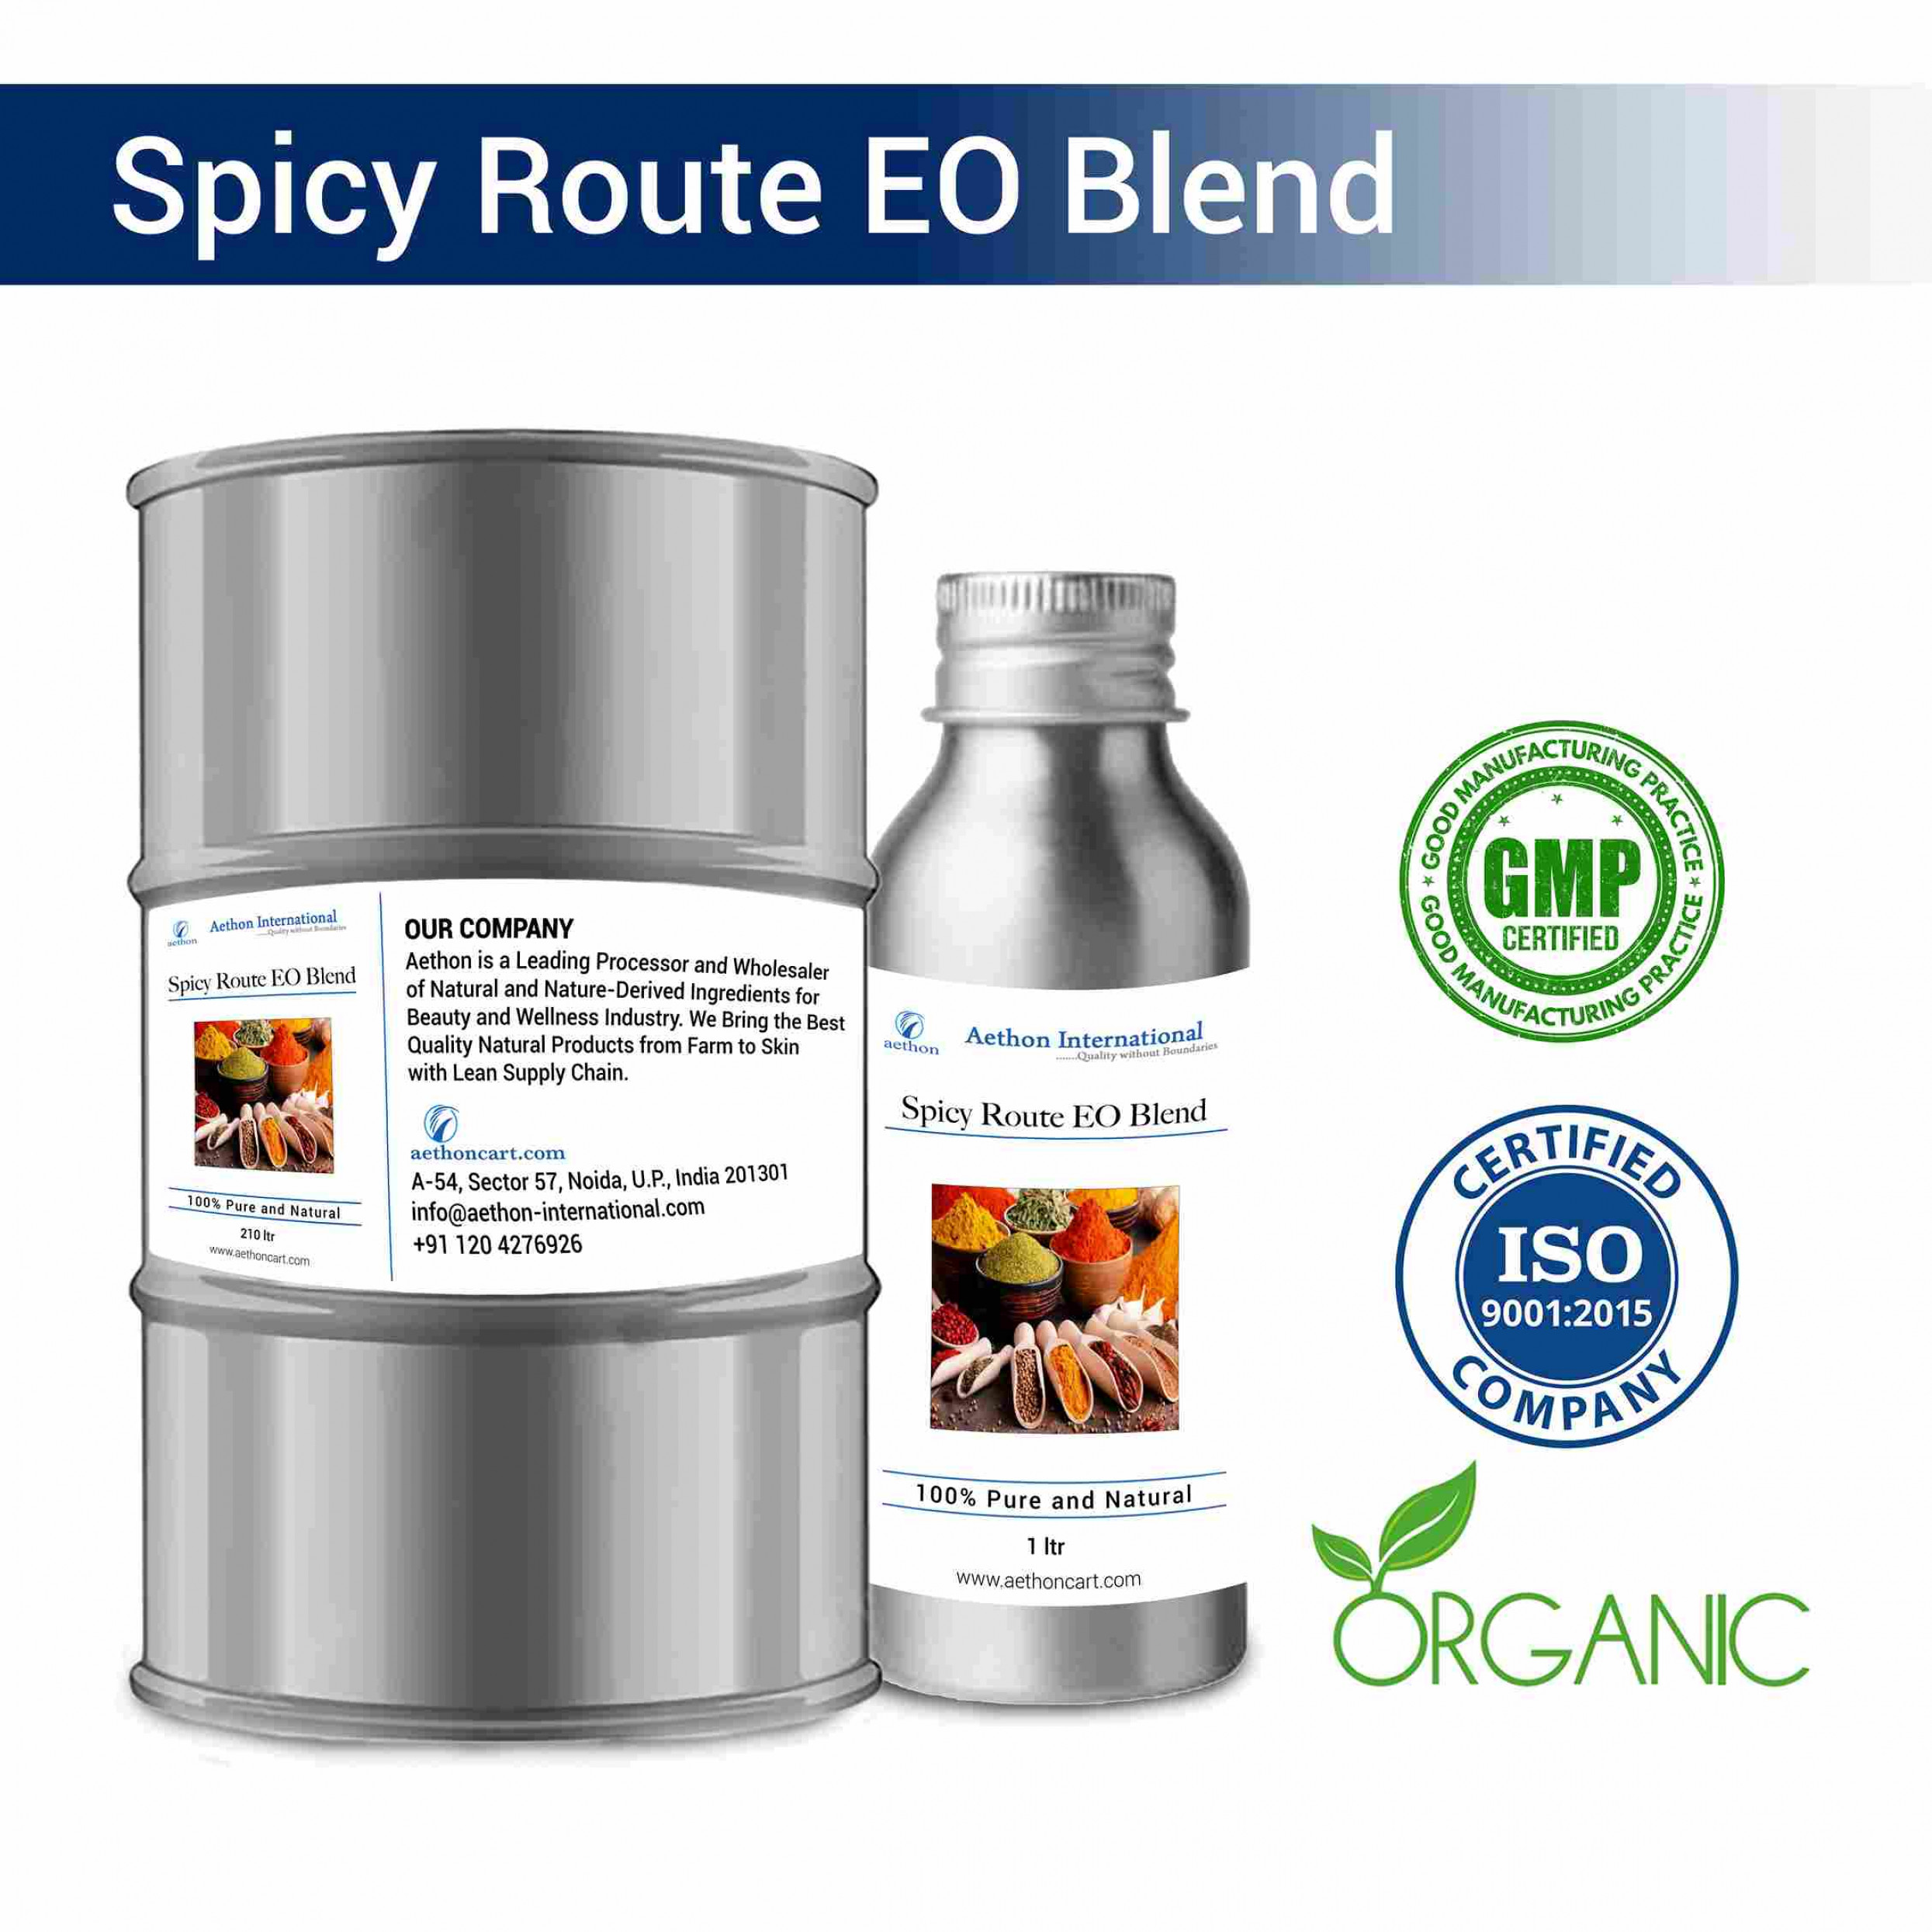 Spicy Route EO Blend